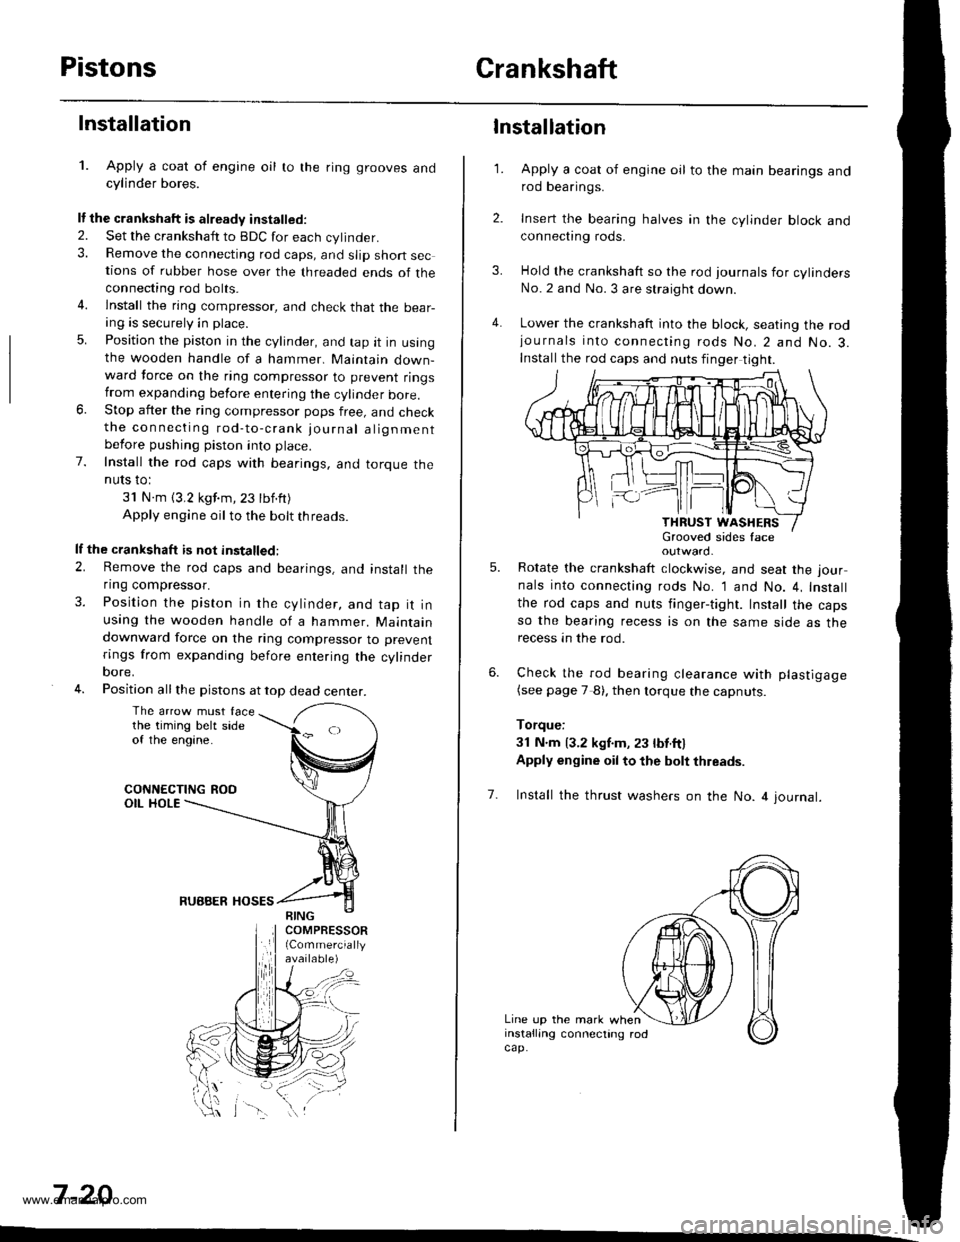 HONDA CR-V 1997 RD1-RD3 / 1.G Workshop Manual 
PistonsCrankshaft
Installation
1. Apply a coat of engine oil to the ring grooves andcylinder bores.
It the crankshaft is already installed.
2. Set the crankshatt to BDC for each cylinder.3. Remove th